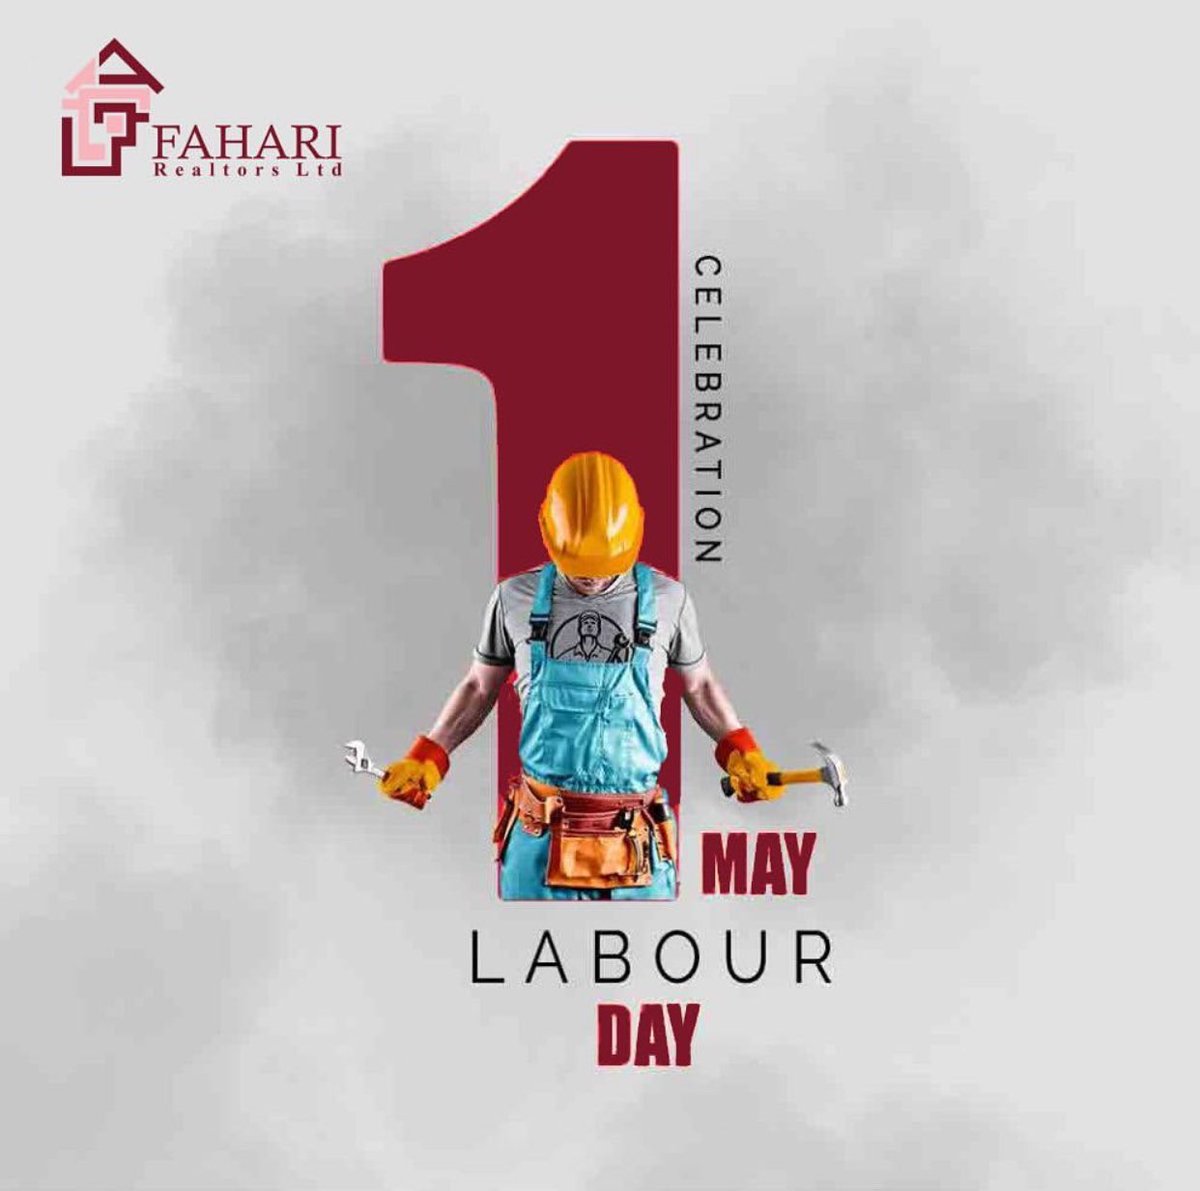 Happy Labour Day from Fahari Realtors! Today, we celebrate the hard work, dedication, and contributions of workers everywhere. Your efforts shape our communities and drive progress.💼👷‍♀️👷‍♂️💪🏽

#LabourDay #FahariRealtors #kahawasukari #kplc #ruiru #larrymadowo #mombasaroad #Flooding